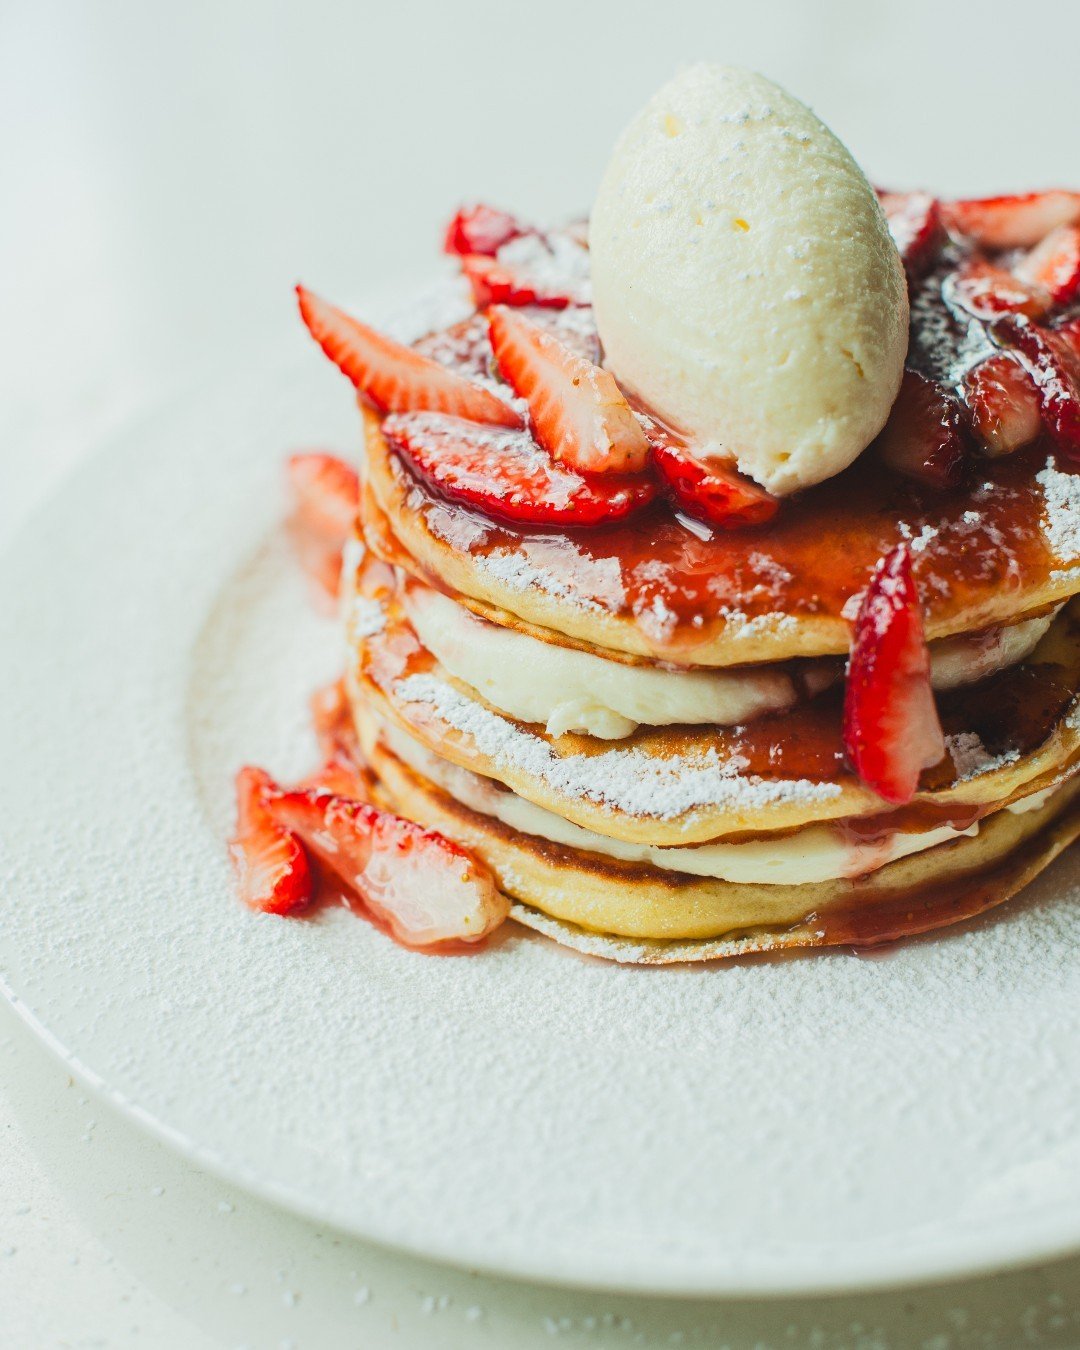 It's strawberry season for bunch at bar Vetti! 🍓

NEW Strawberries &amp; Cream Pancakes
Featuring whipped mascarpone, strawberry jam, and fresh strawberries

Get your reservation at barvetti.com